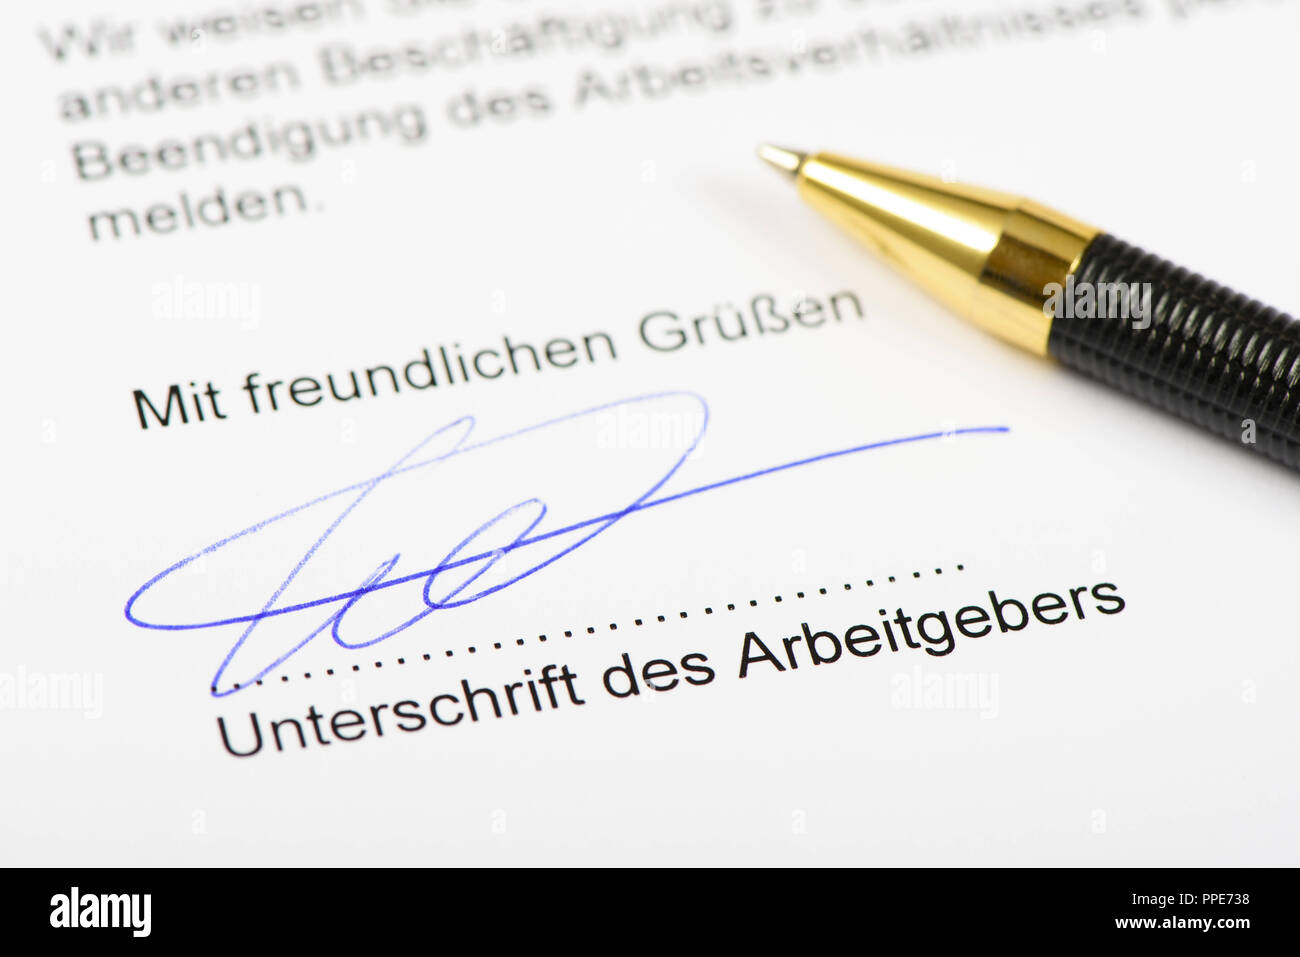 Termination of the employment relationship with the signature of the employer Stock Photo